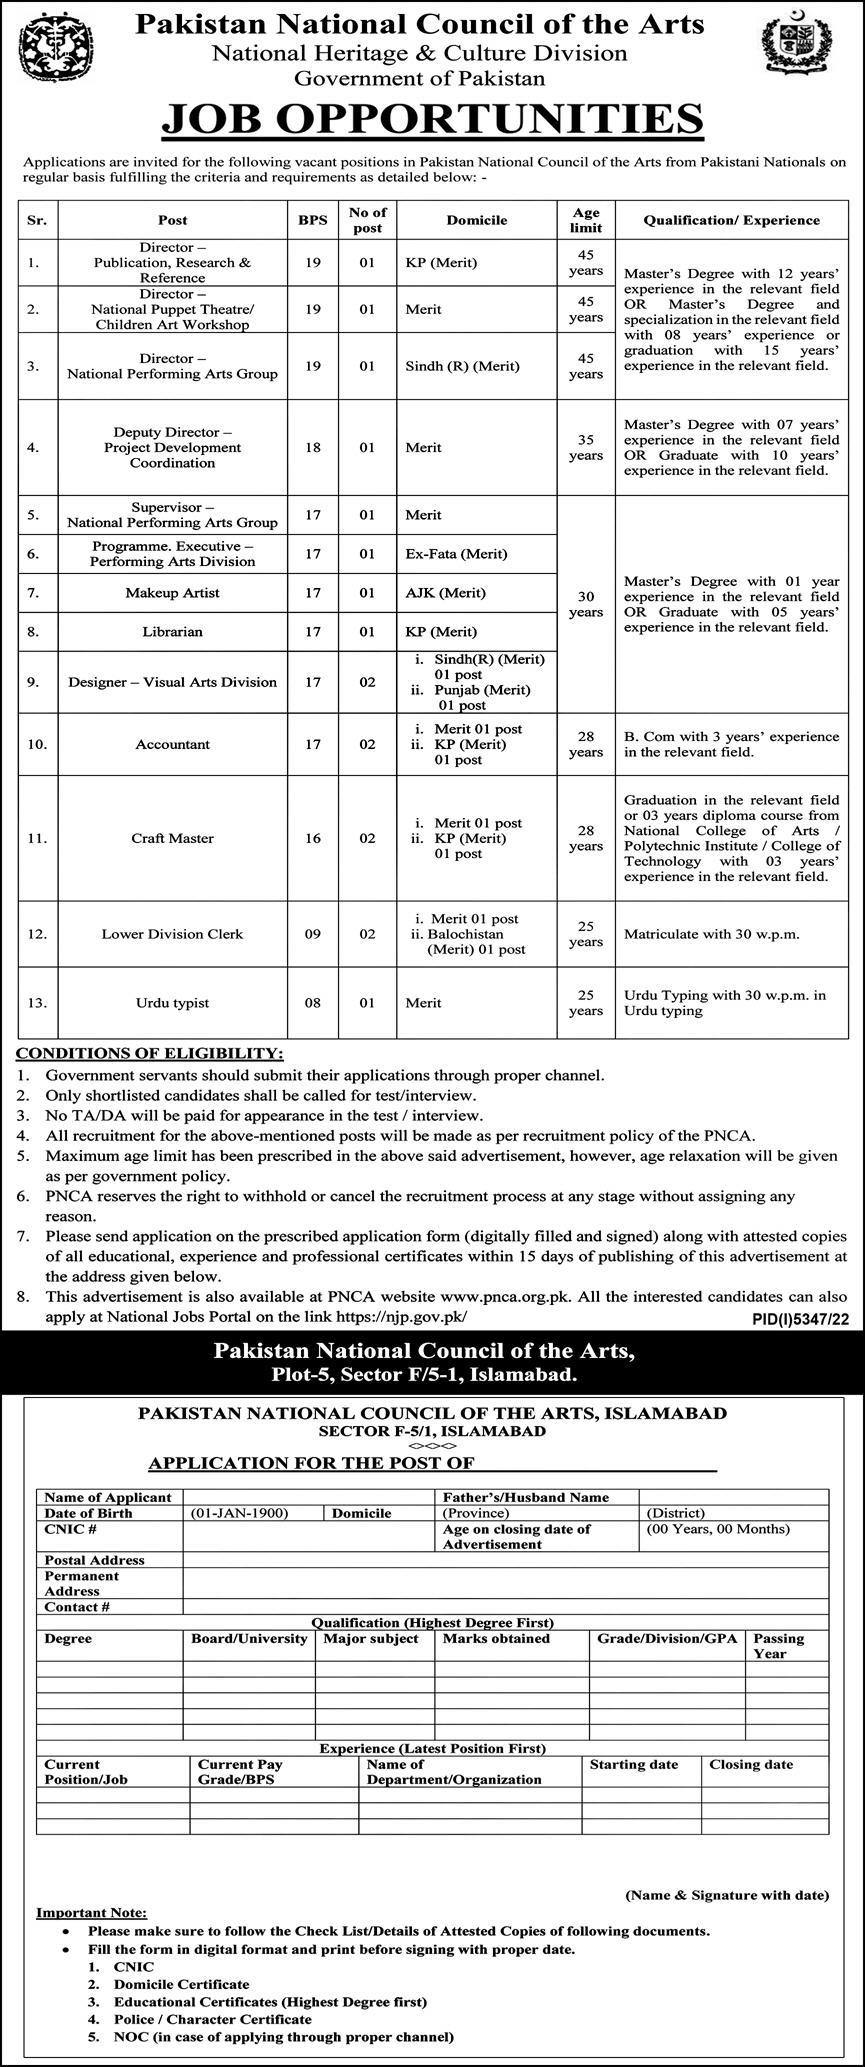 Jobs in Pakistan National Council of Arts